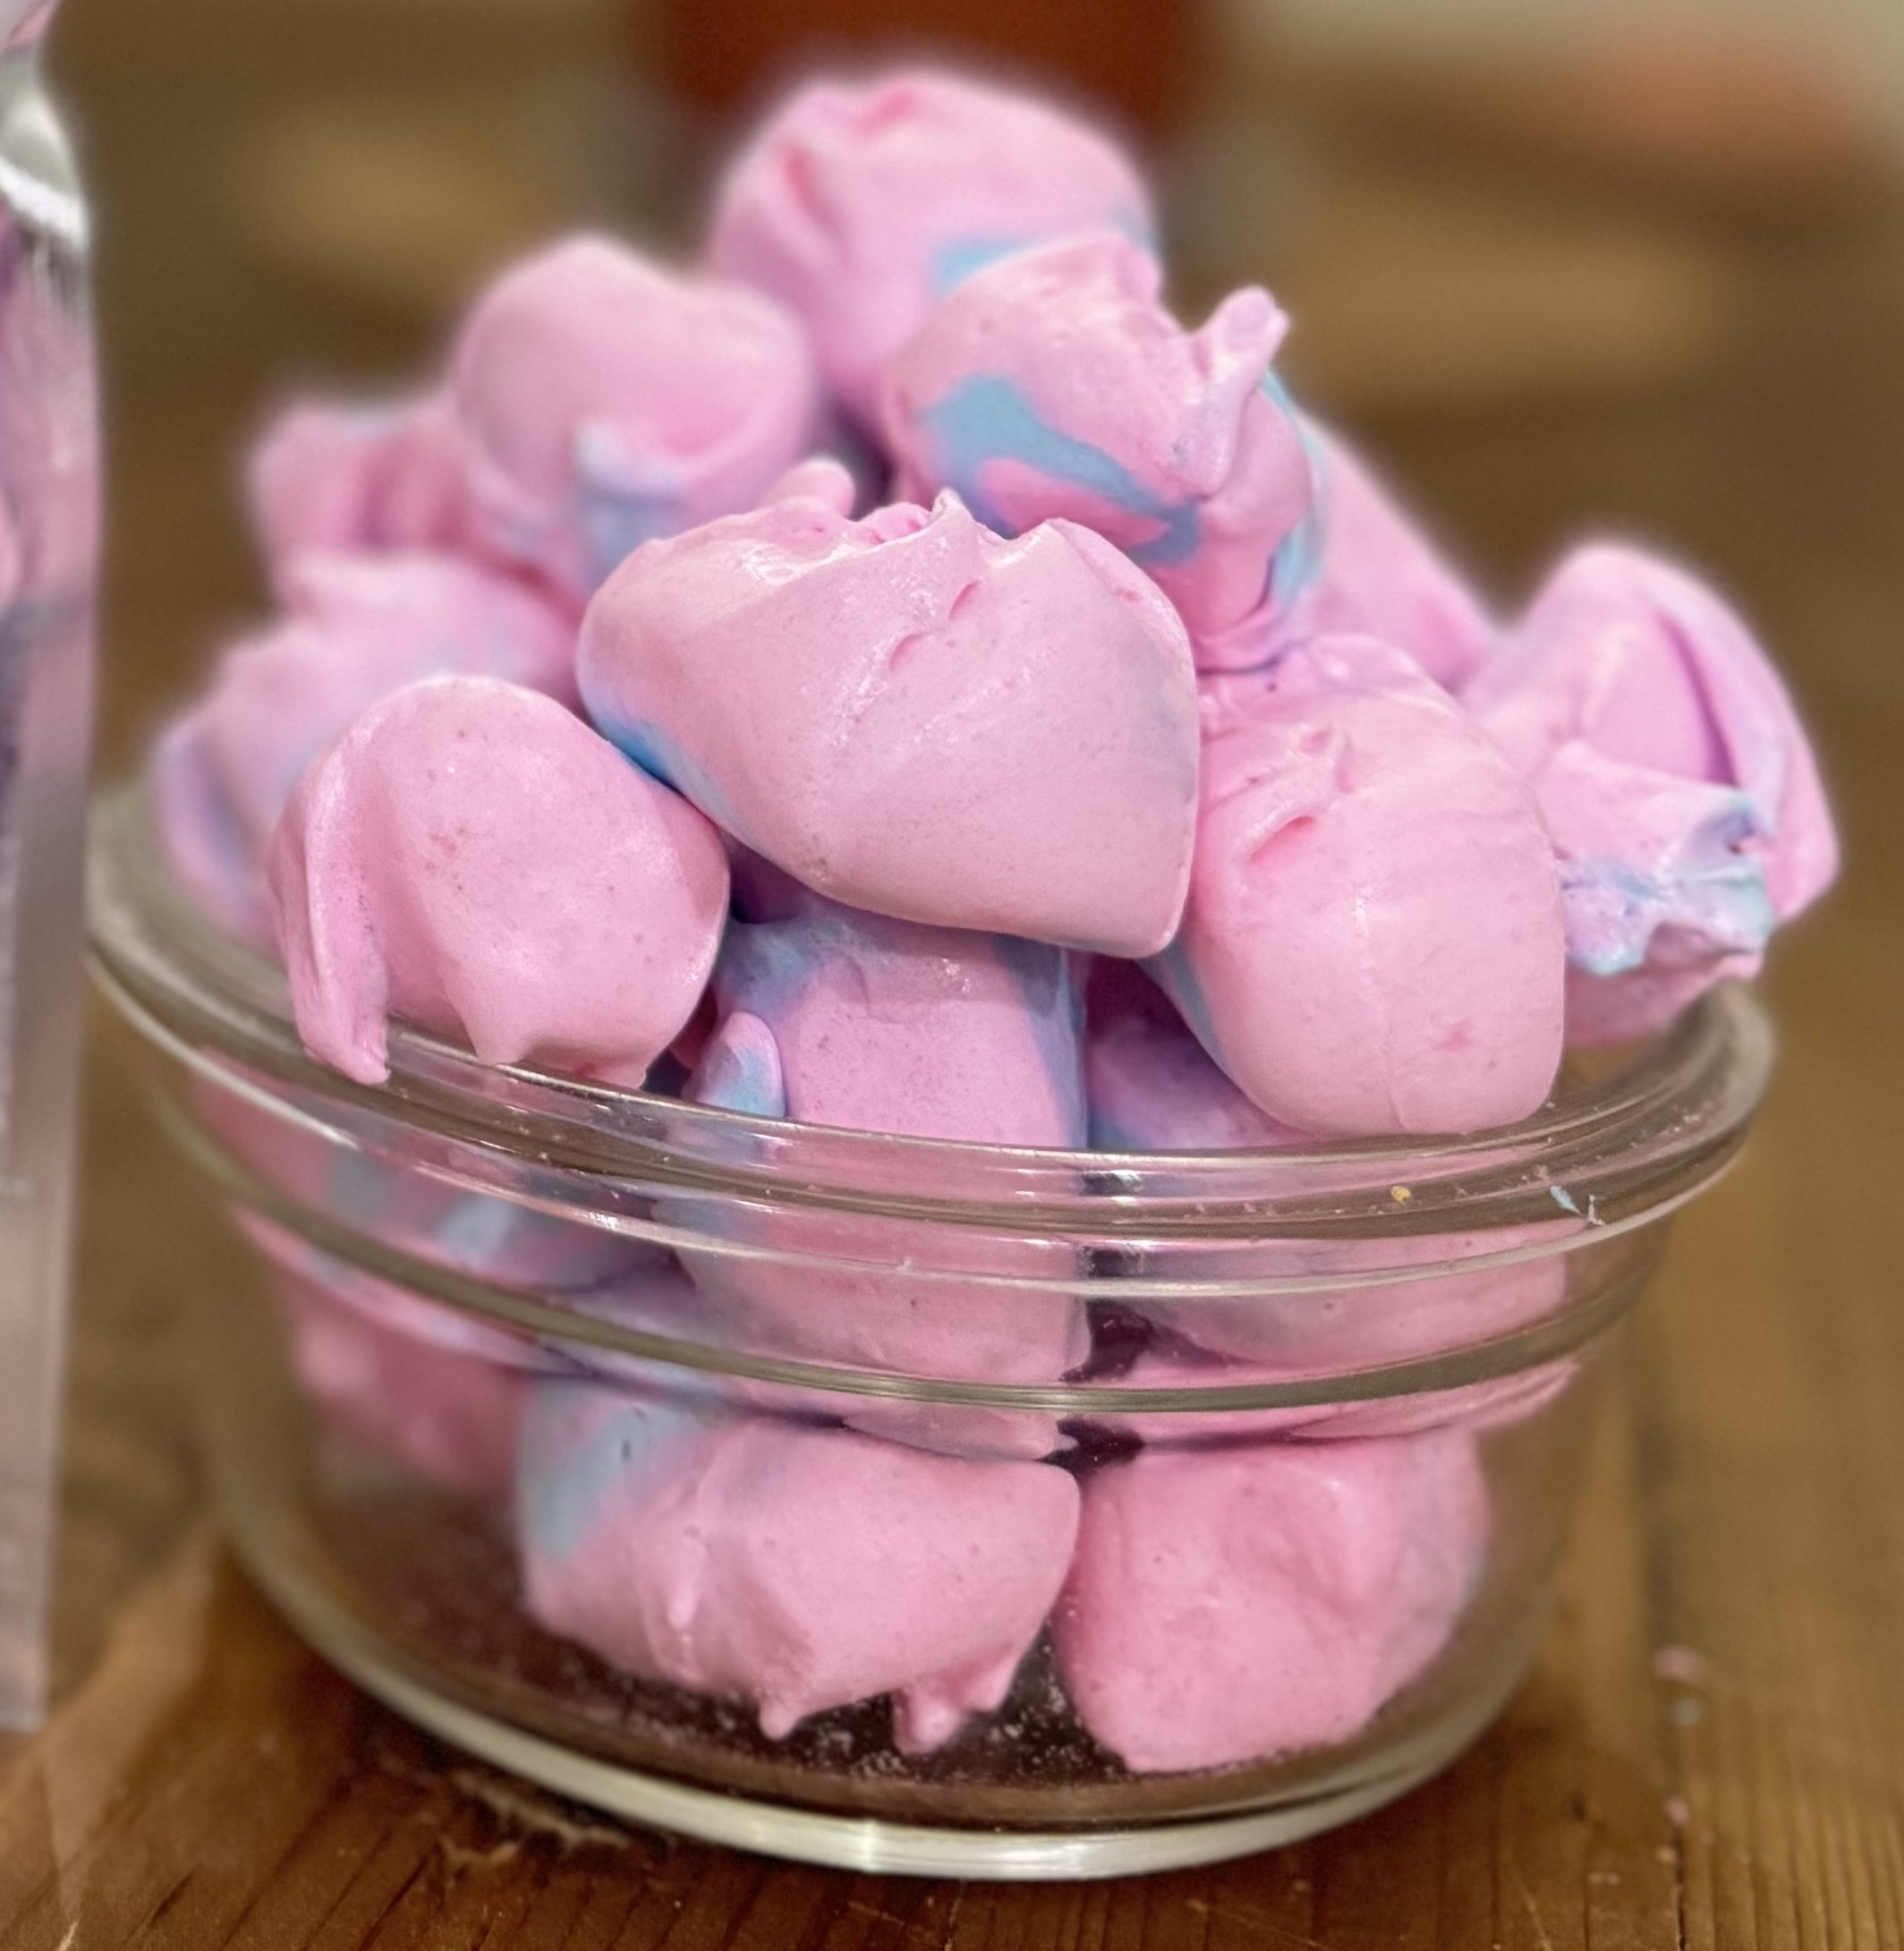 Bowl of Freeze Dried Cotton Candy Flavored Taffy from Crunchie Freeze Dried